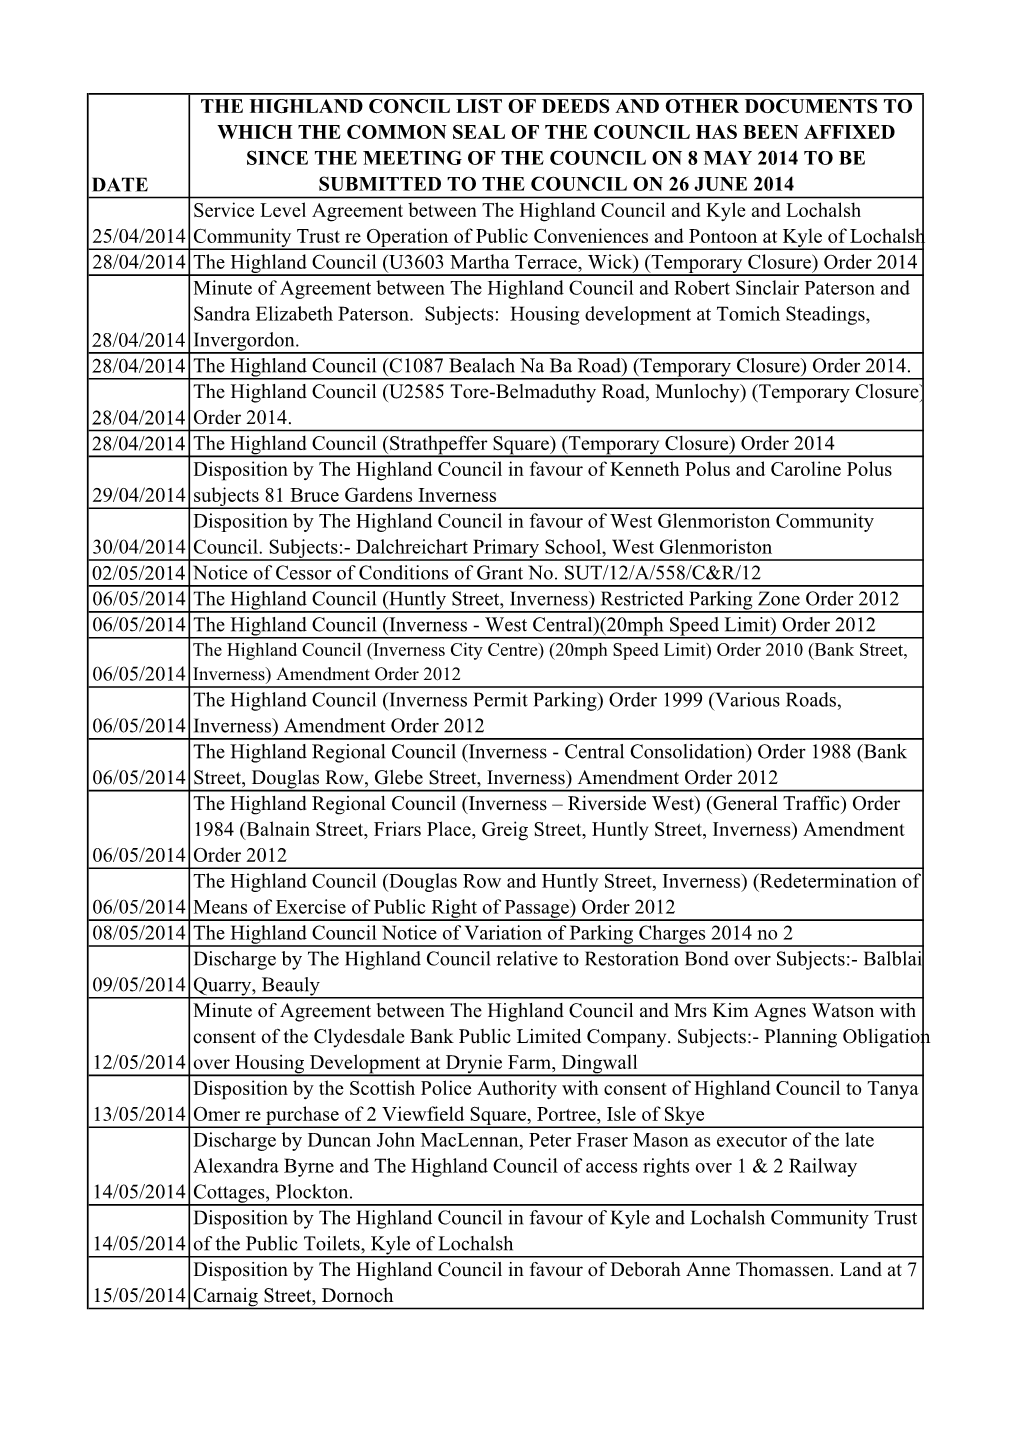 List of Deeds Since 8 May 2014